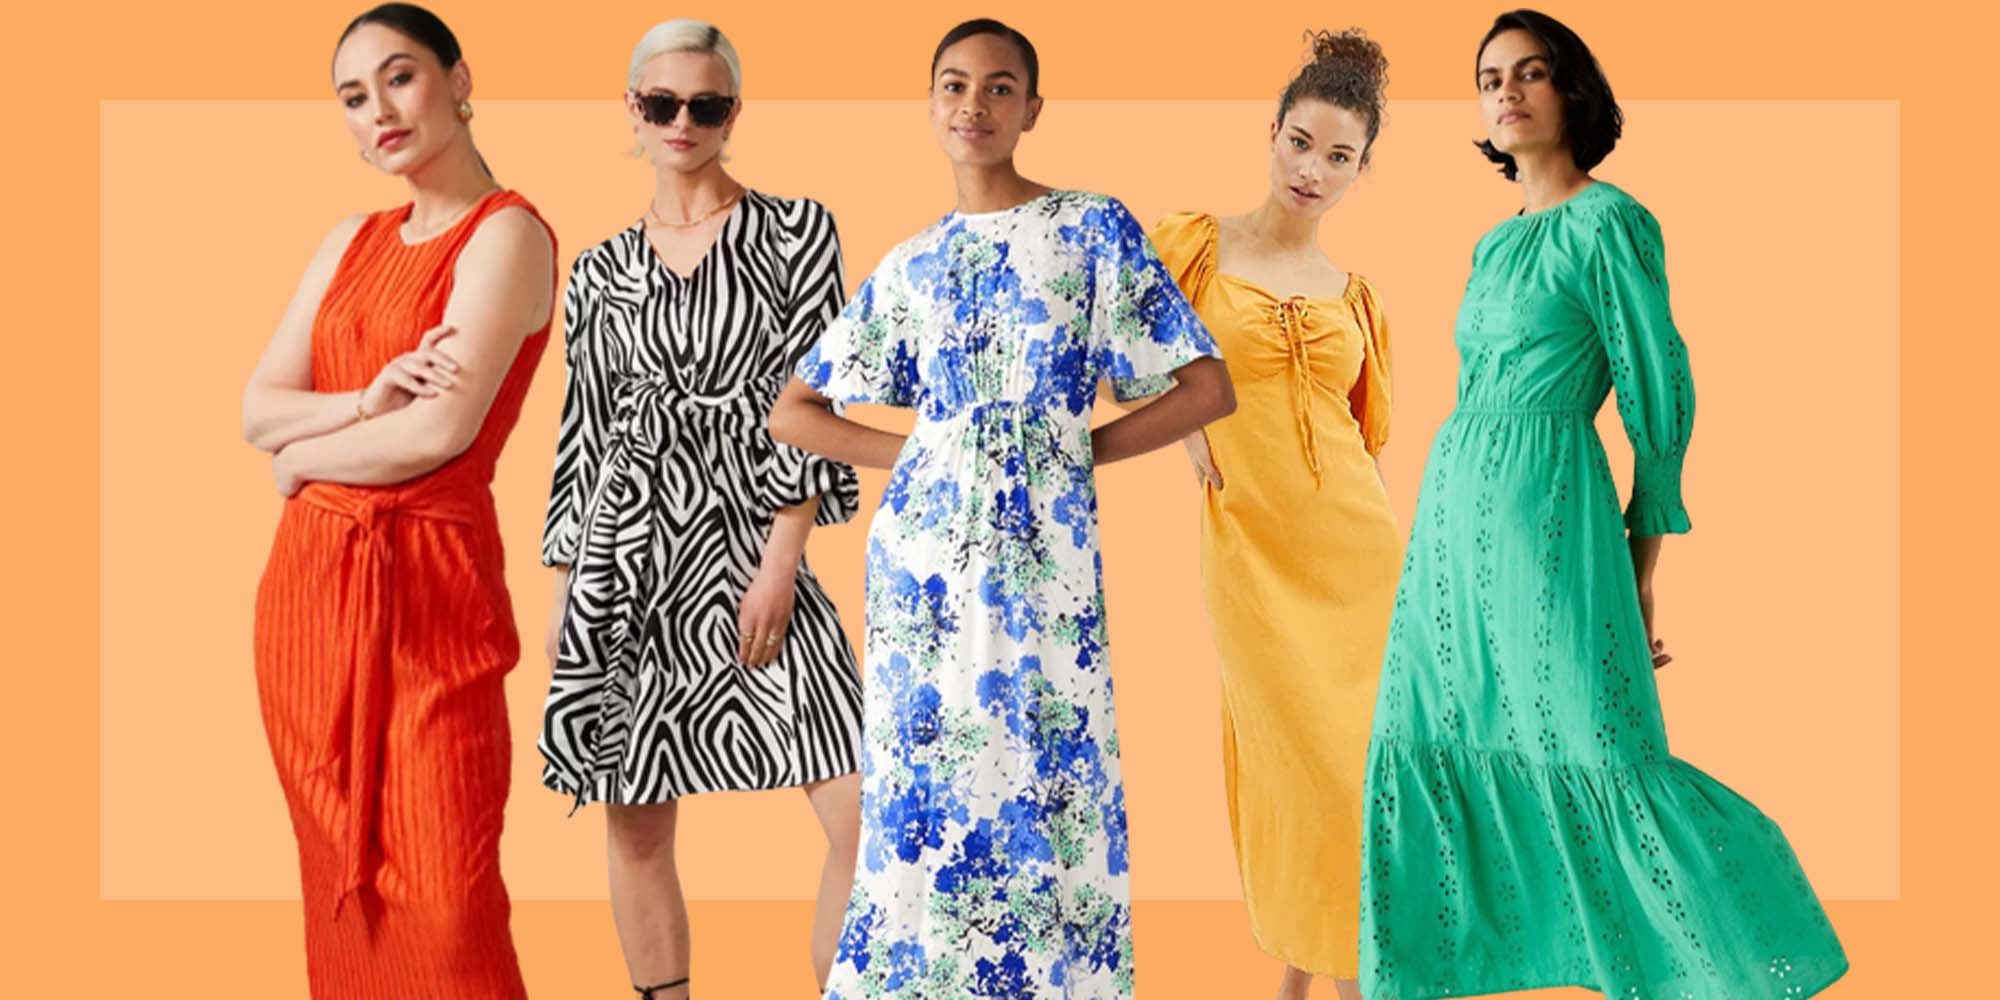 The stylish supermarket summer dresses we're loving right now